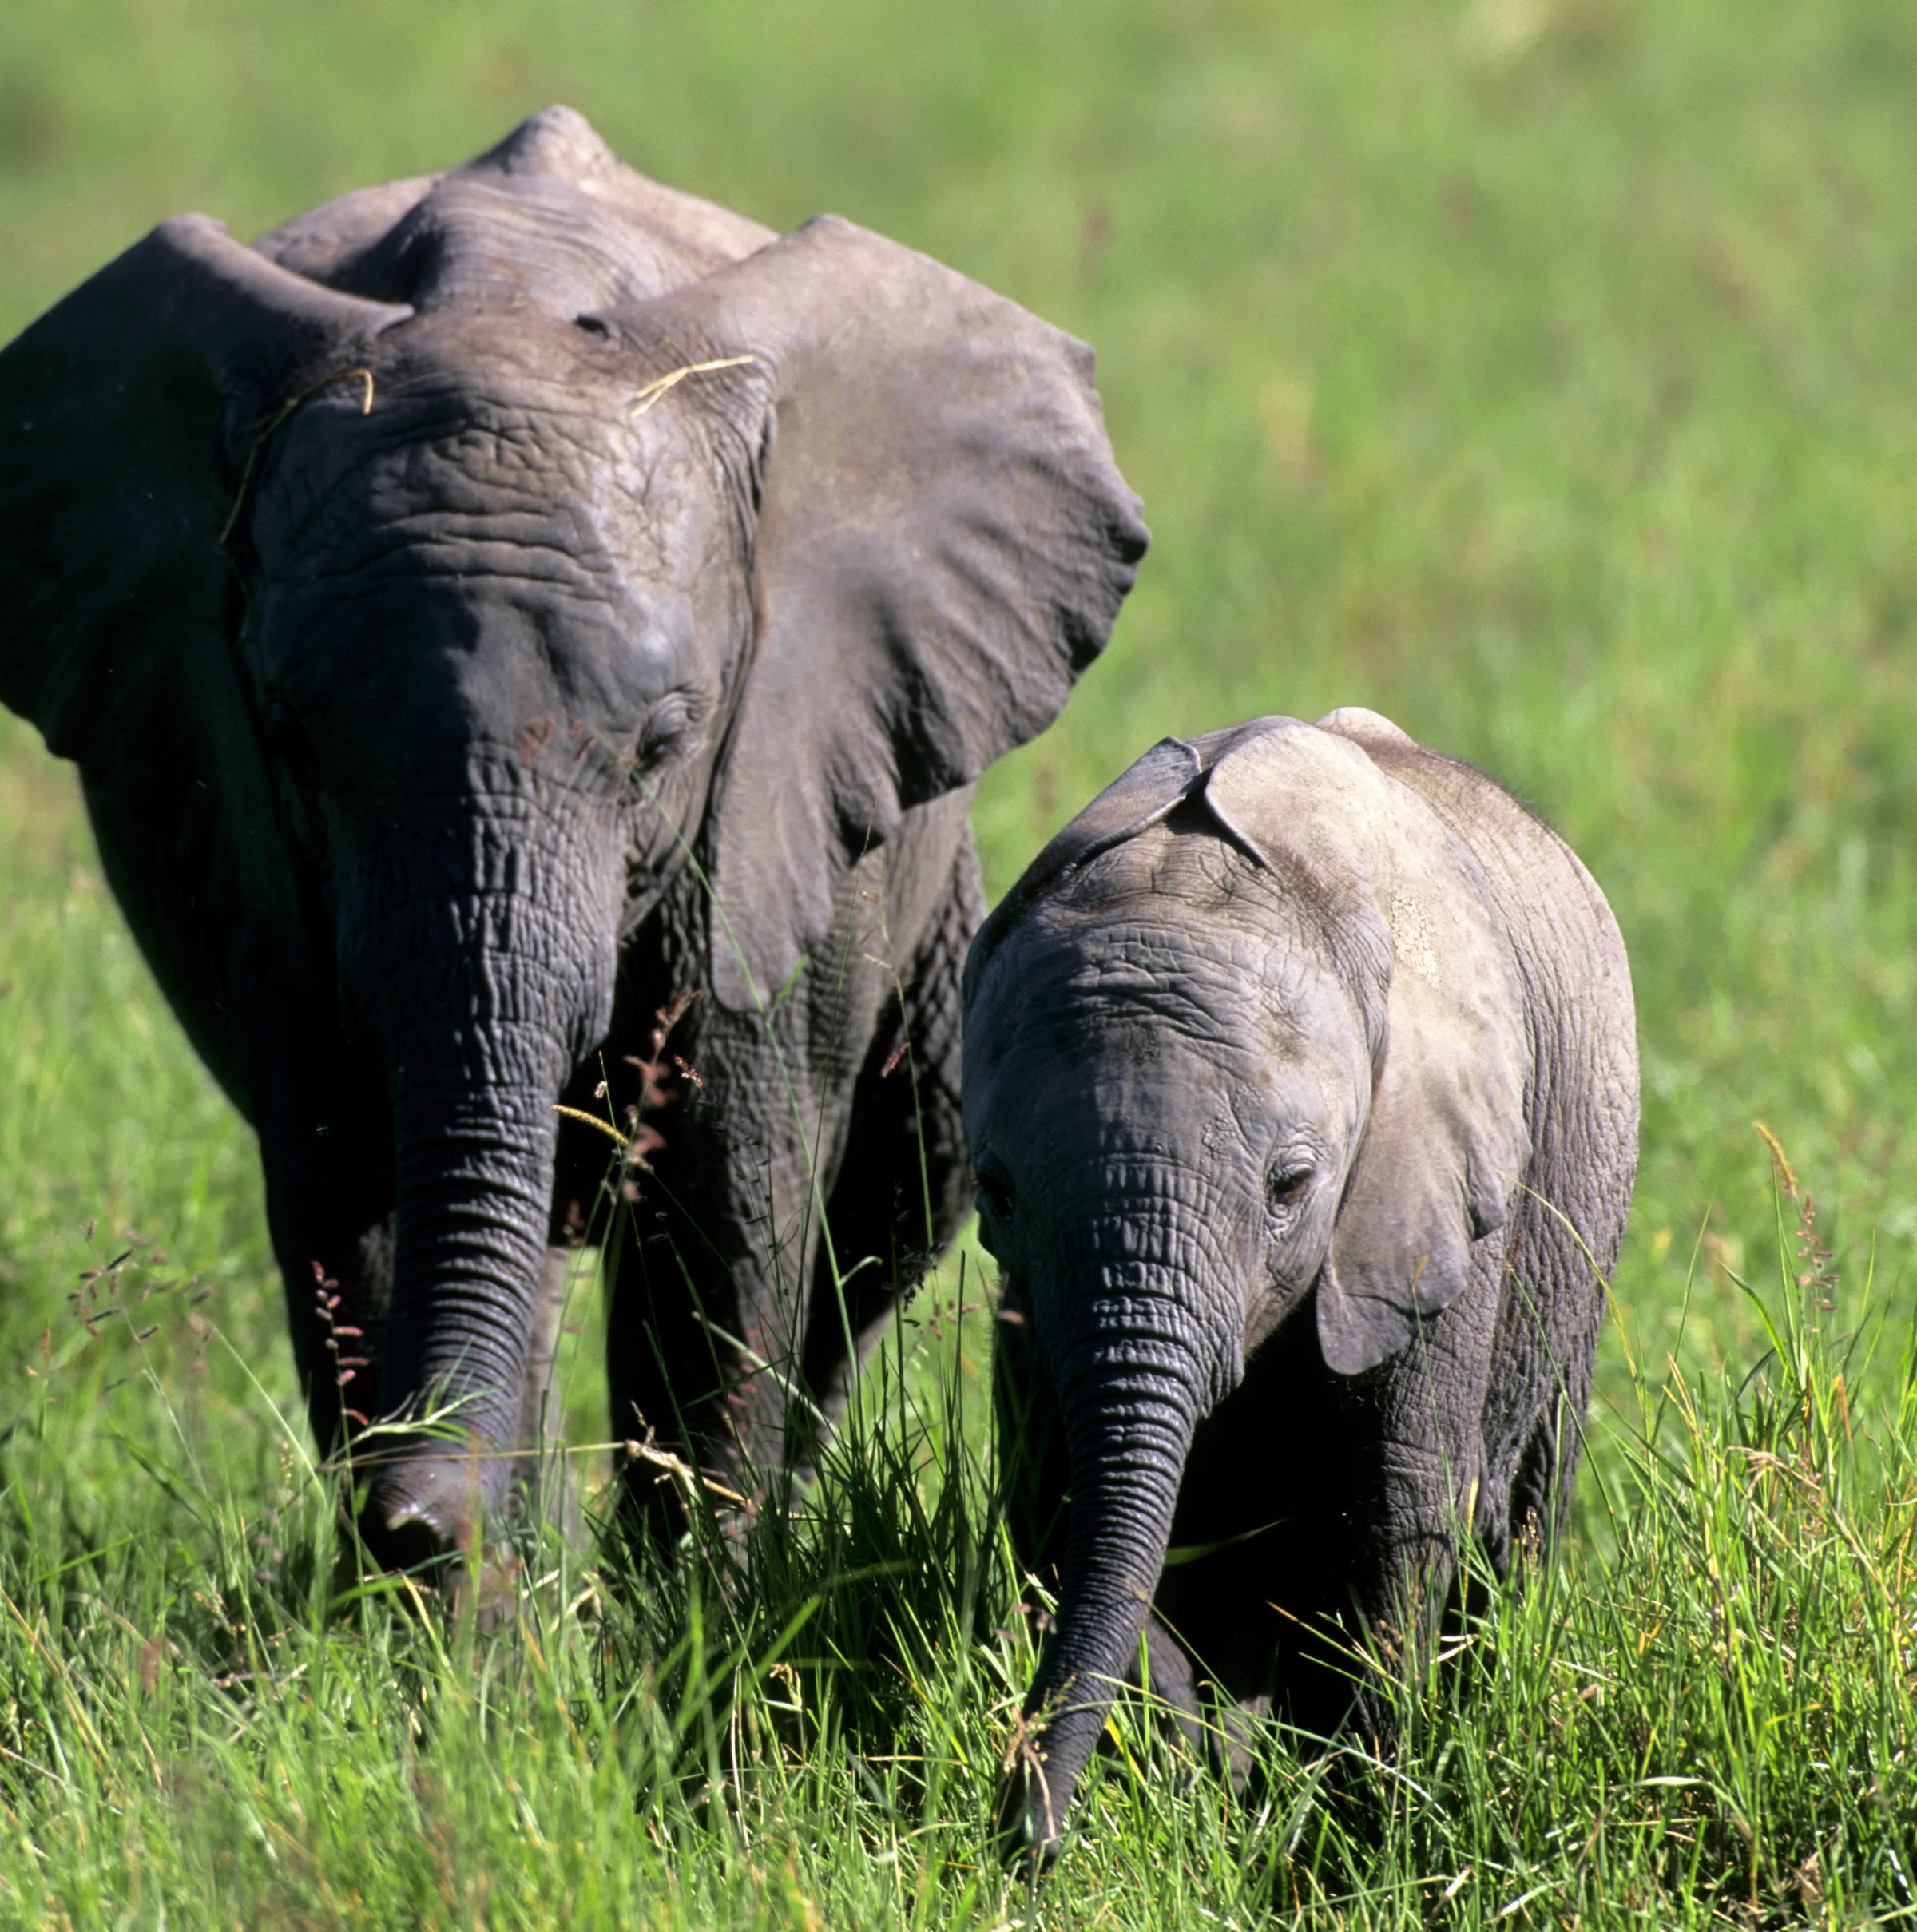 Elephants have names — and they use them with each other